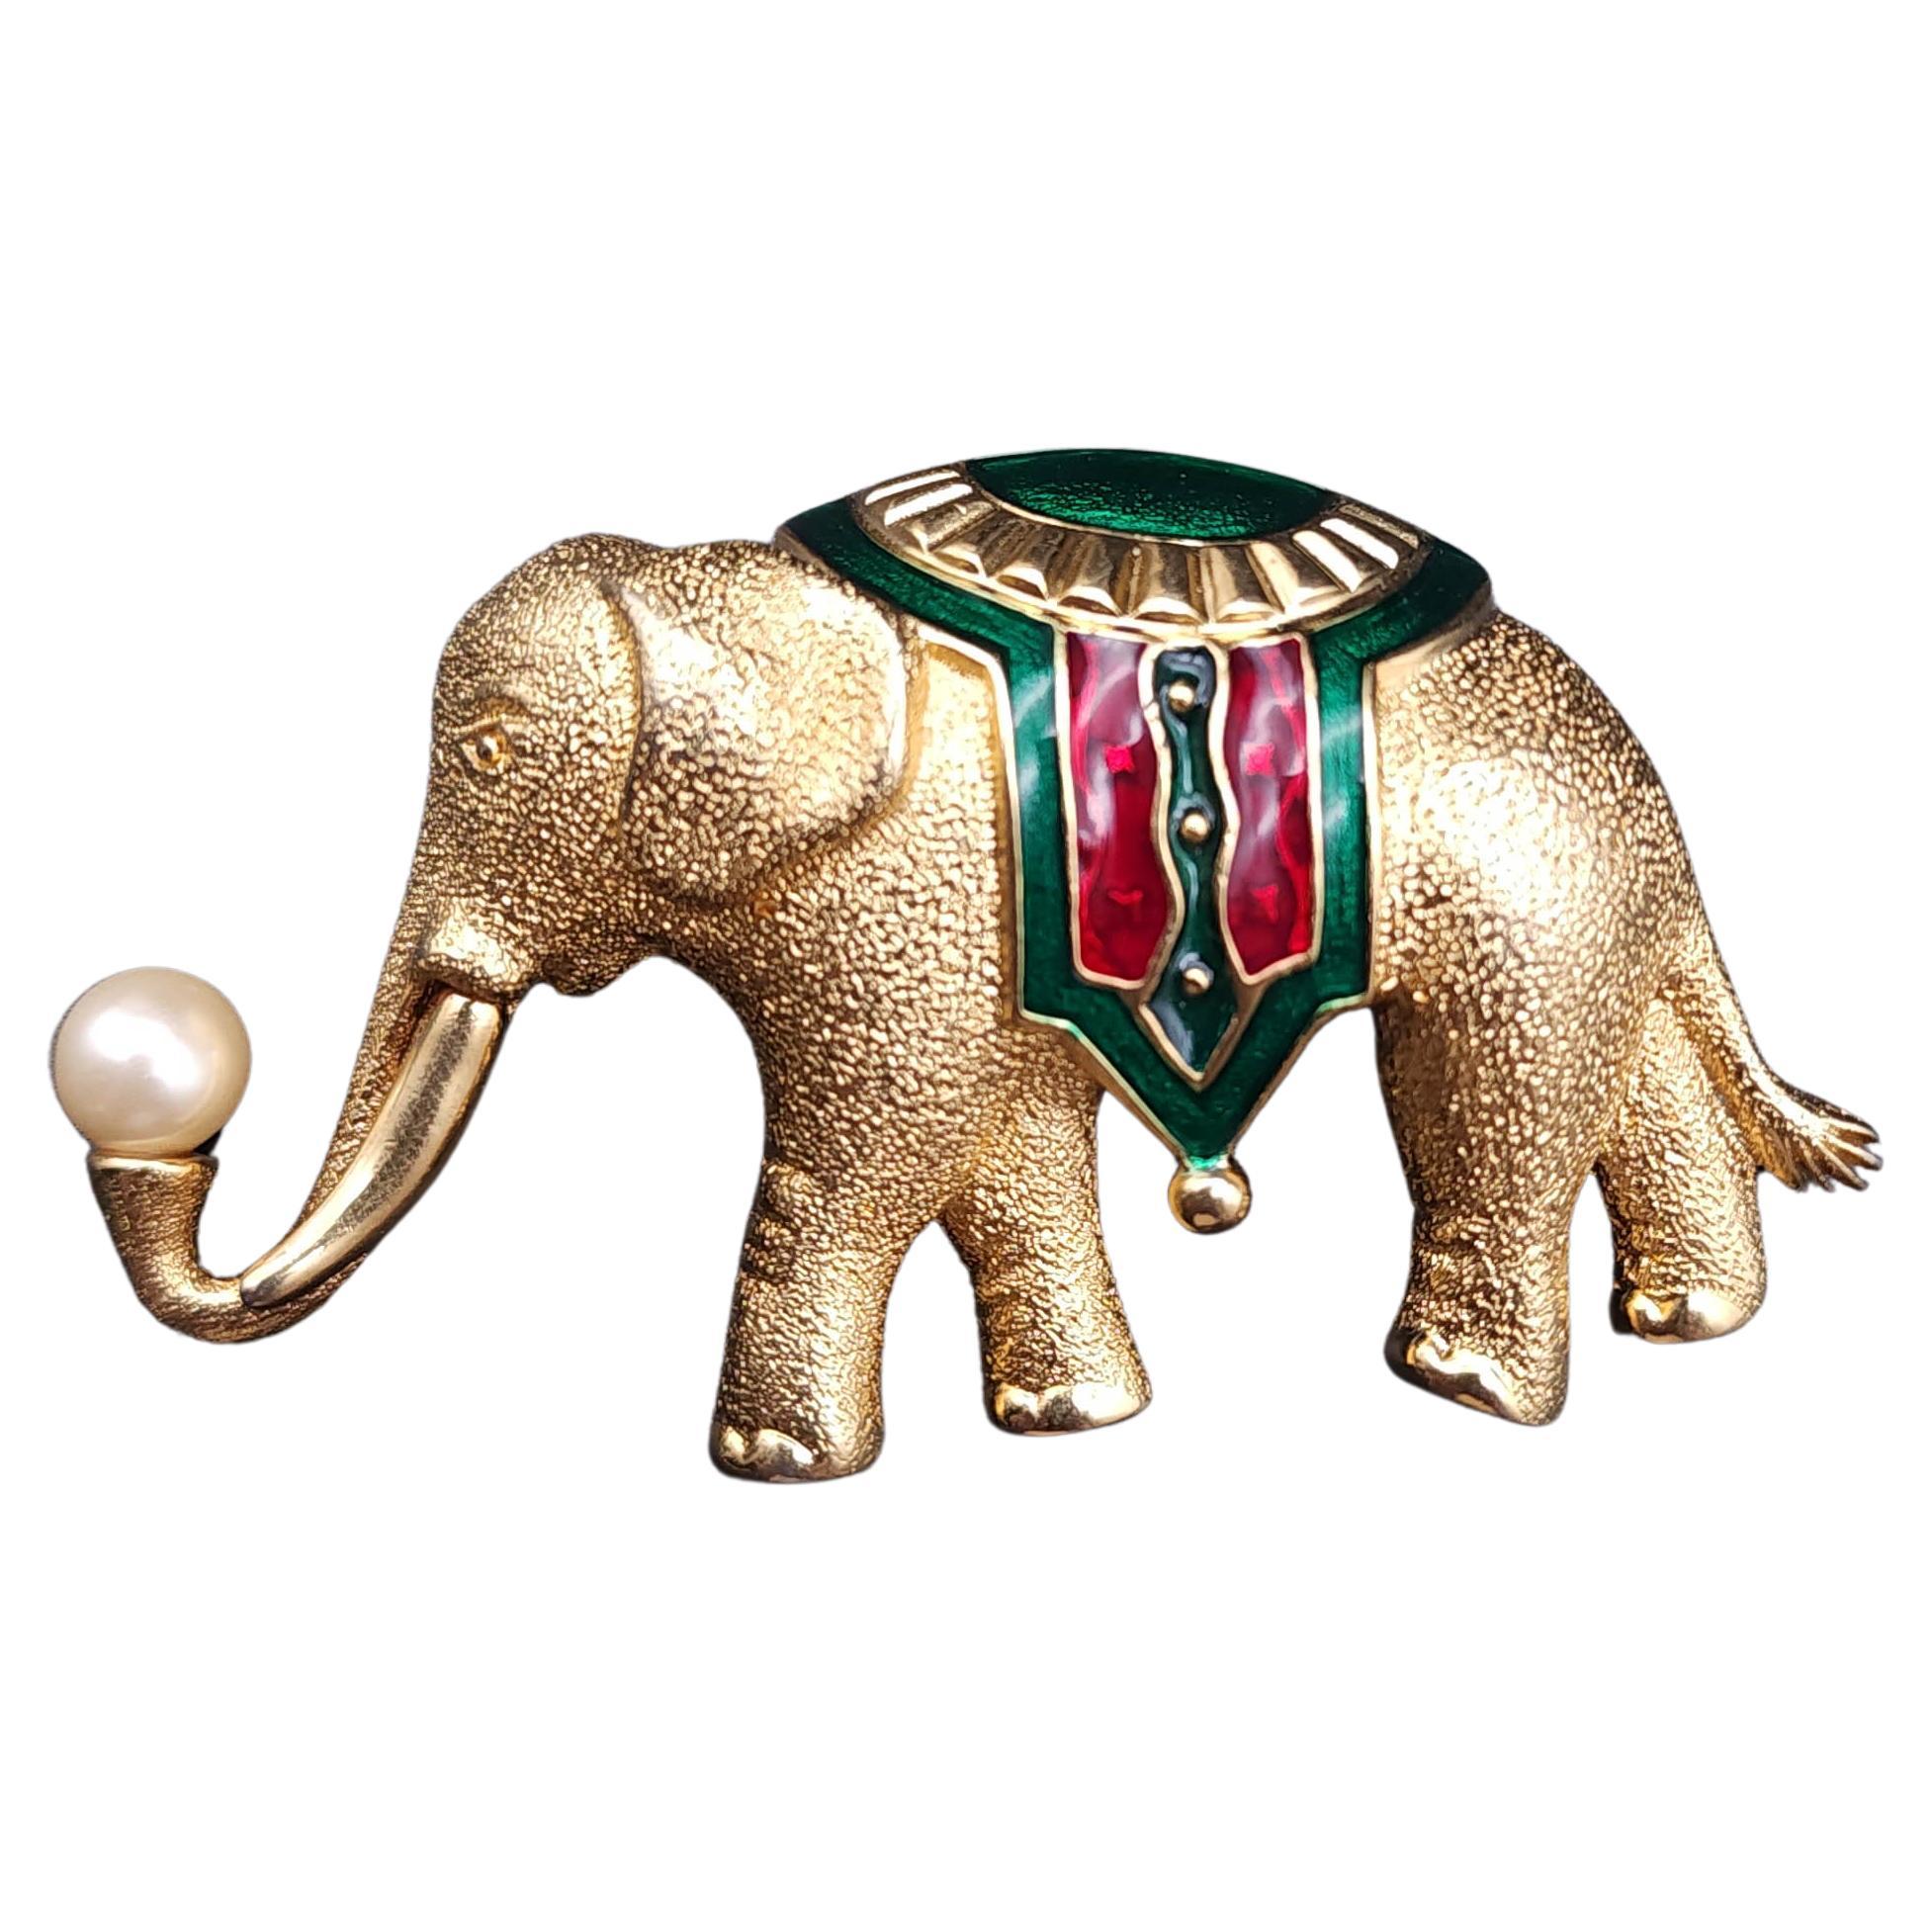 Monet Elephant Brooch with Faux Pearl and Enamel Accents, Vintage, Gold Filled For Sale